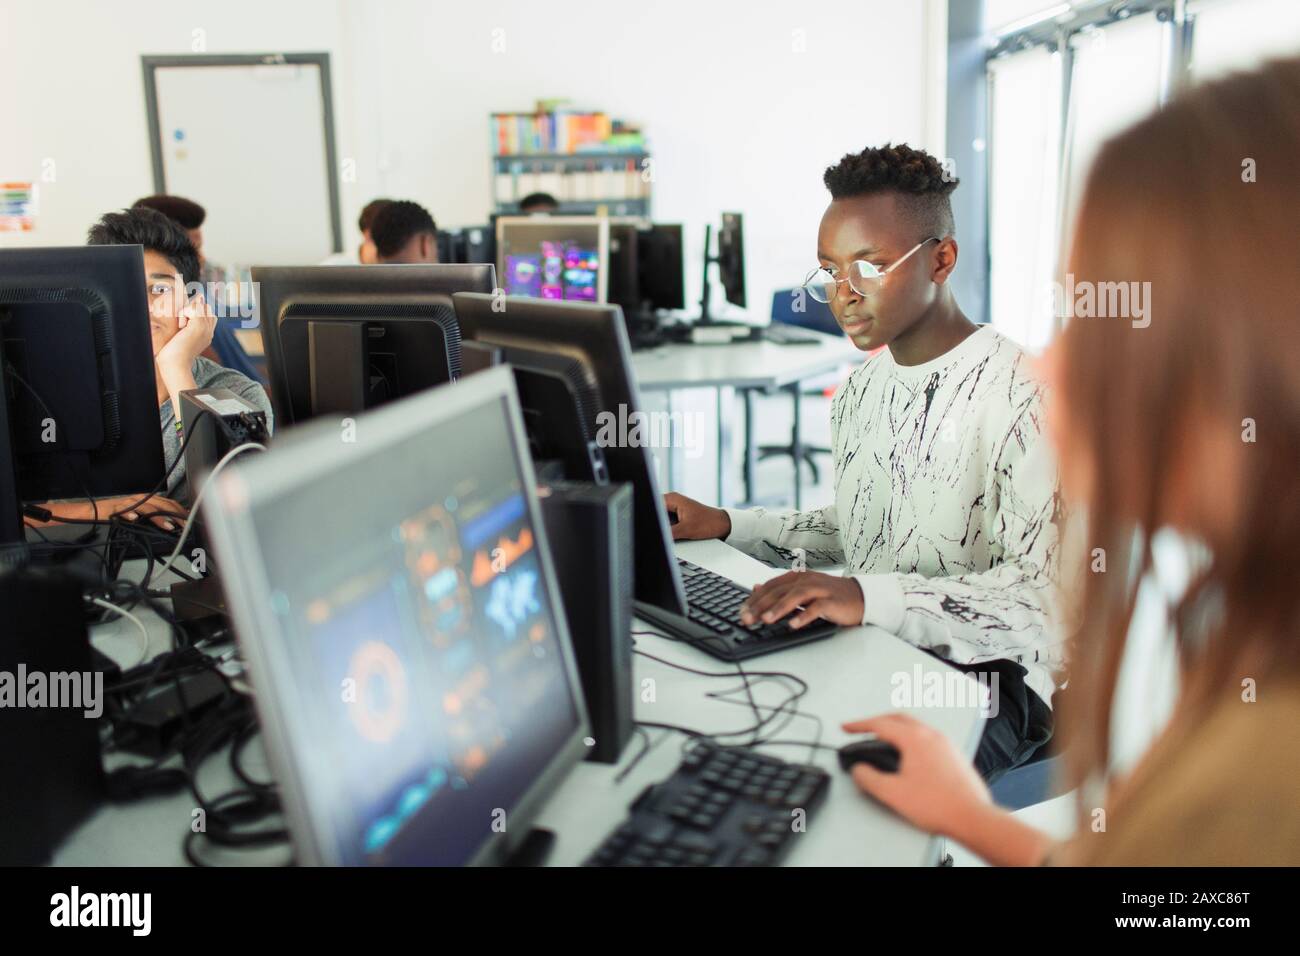 Focused junior high boy student using computer in computer lab Stock Photo